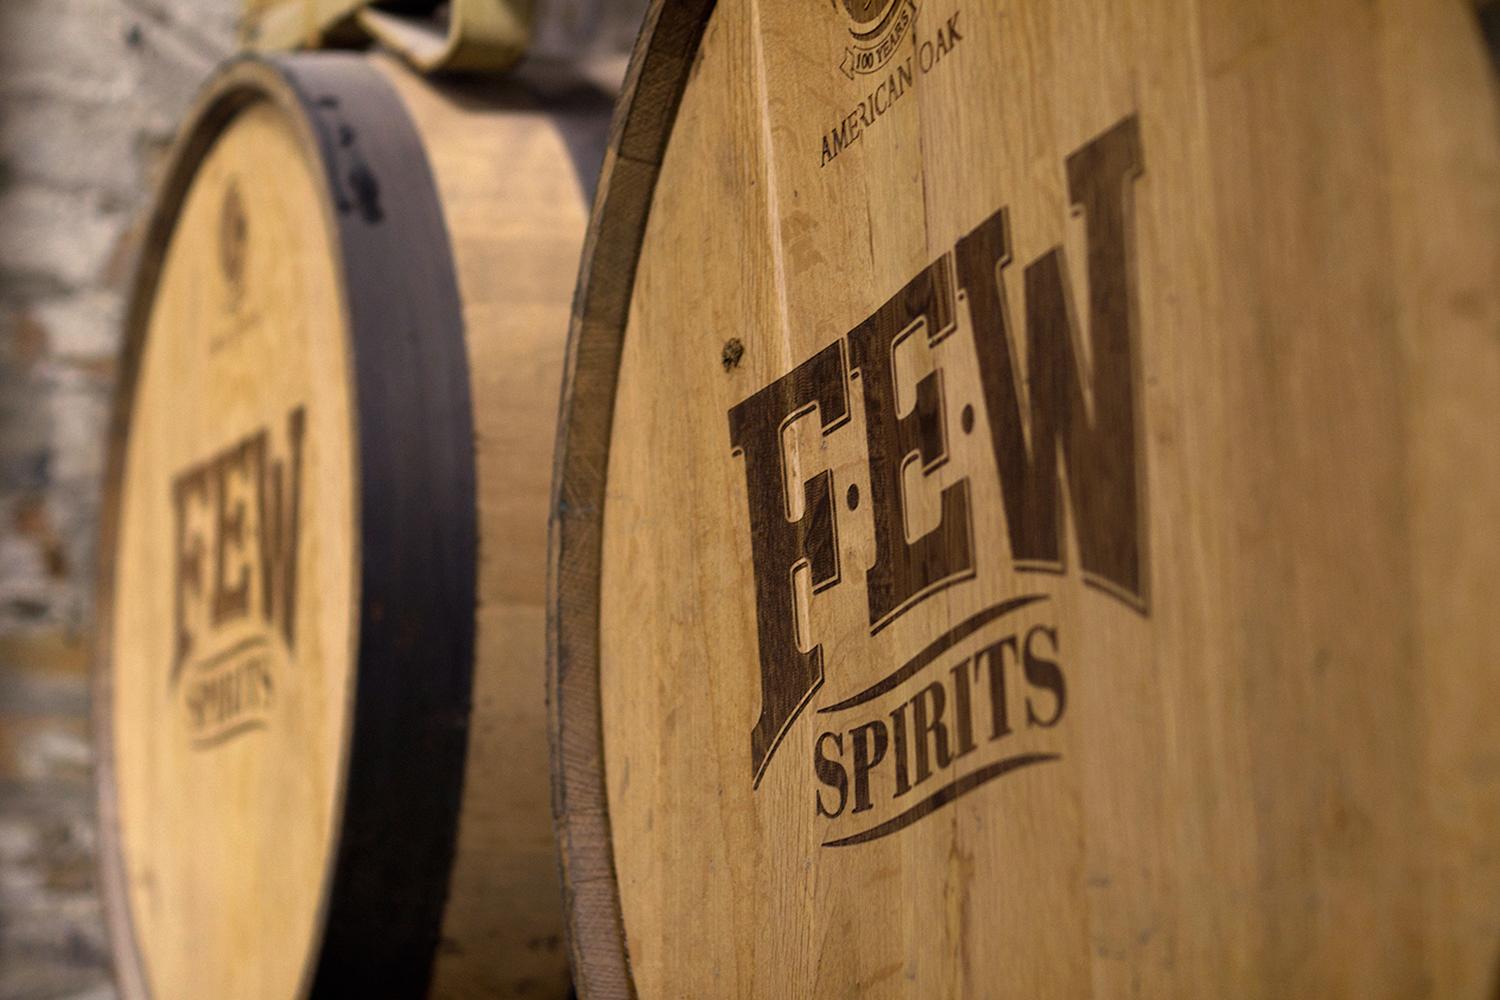 4 barrel-aged gins to blow your barrel-aged mind